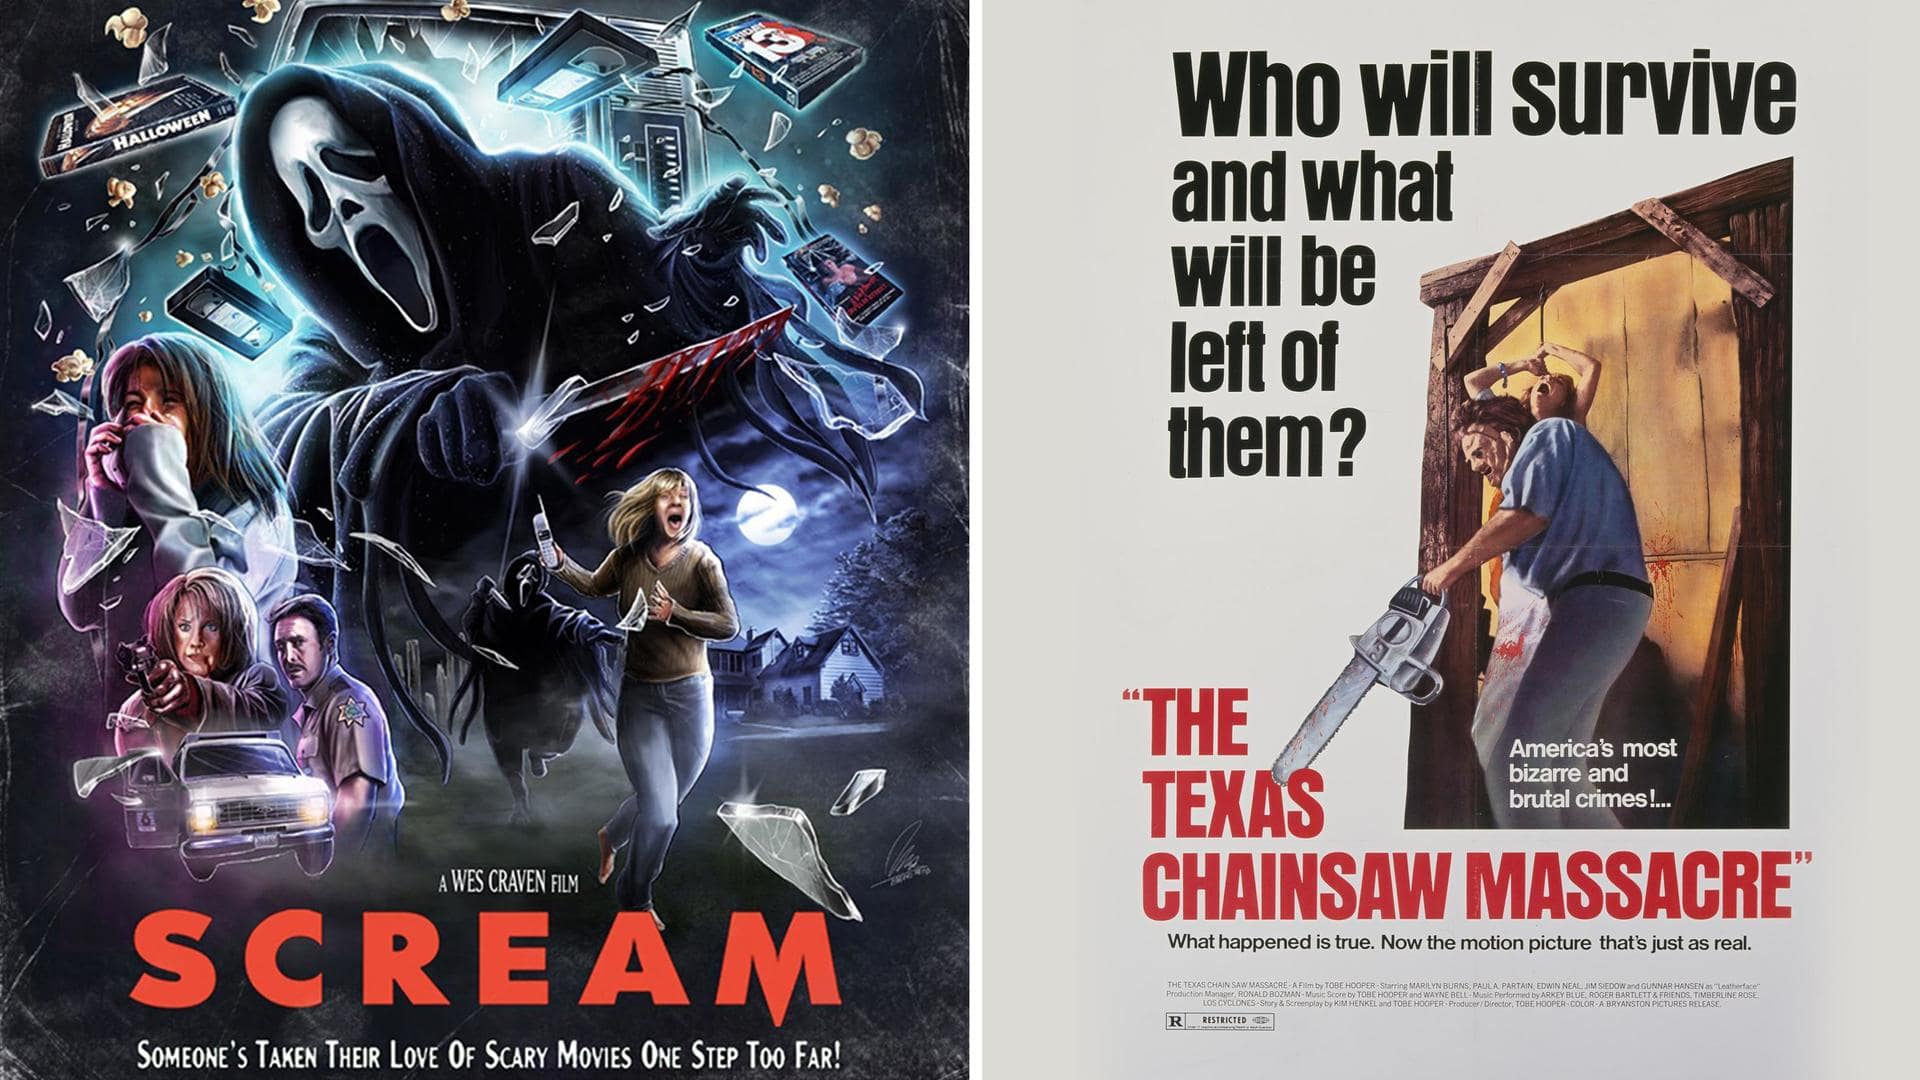 IMDb seeks votes for best Hollywood horror film franchise—what's yours?